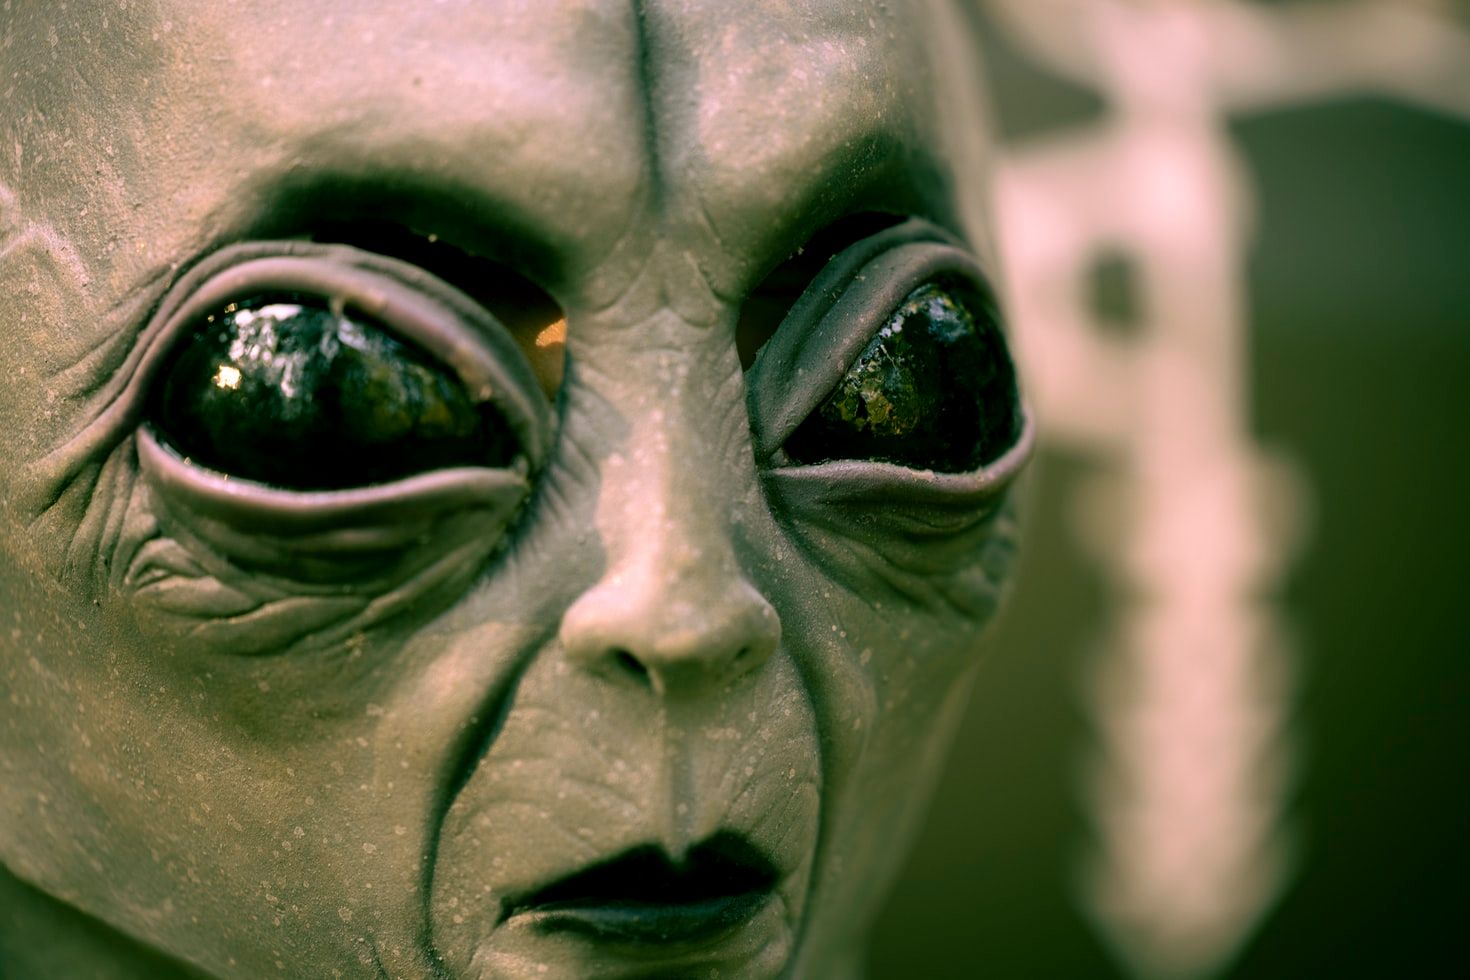 Think you’ve been abducted by aliens? You could be suffering from PTSD